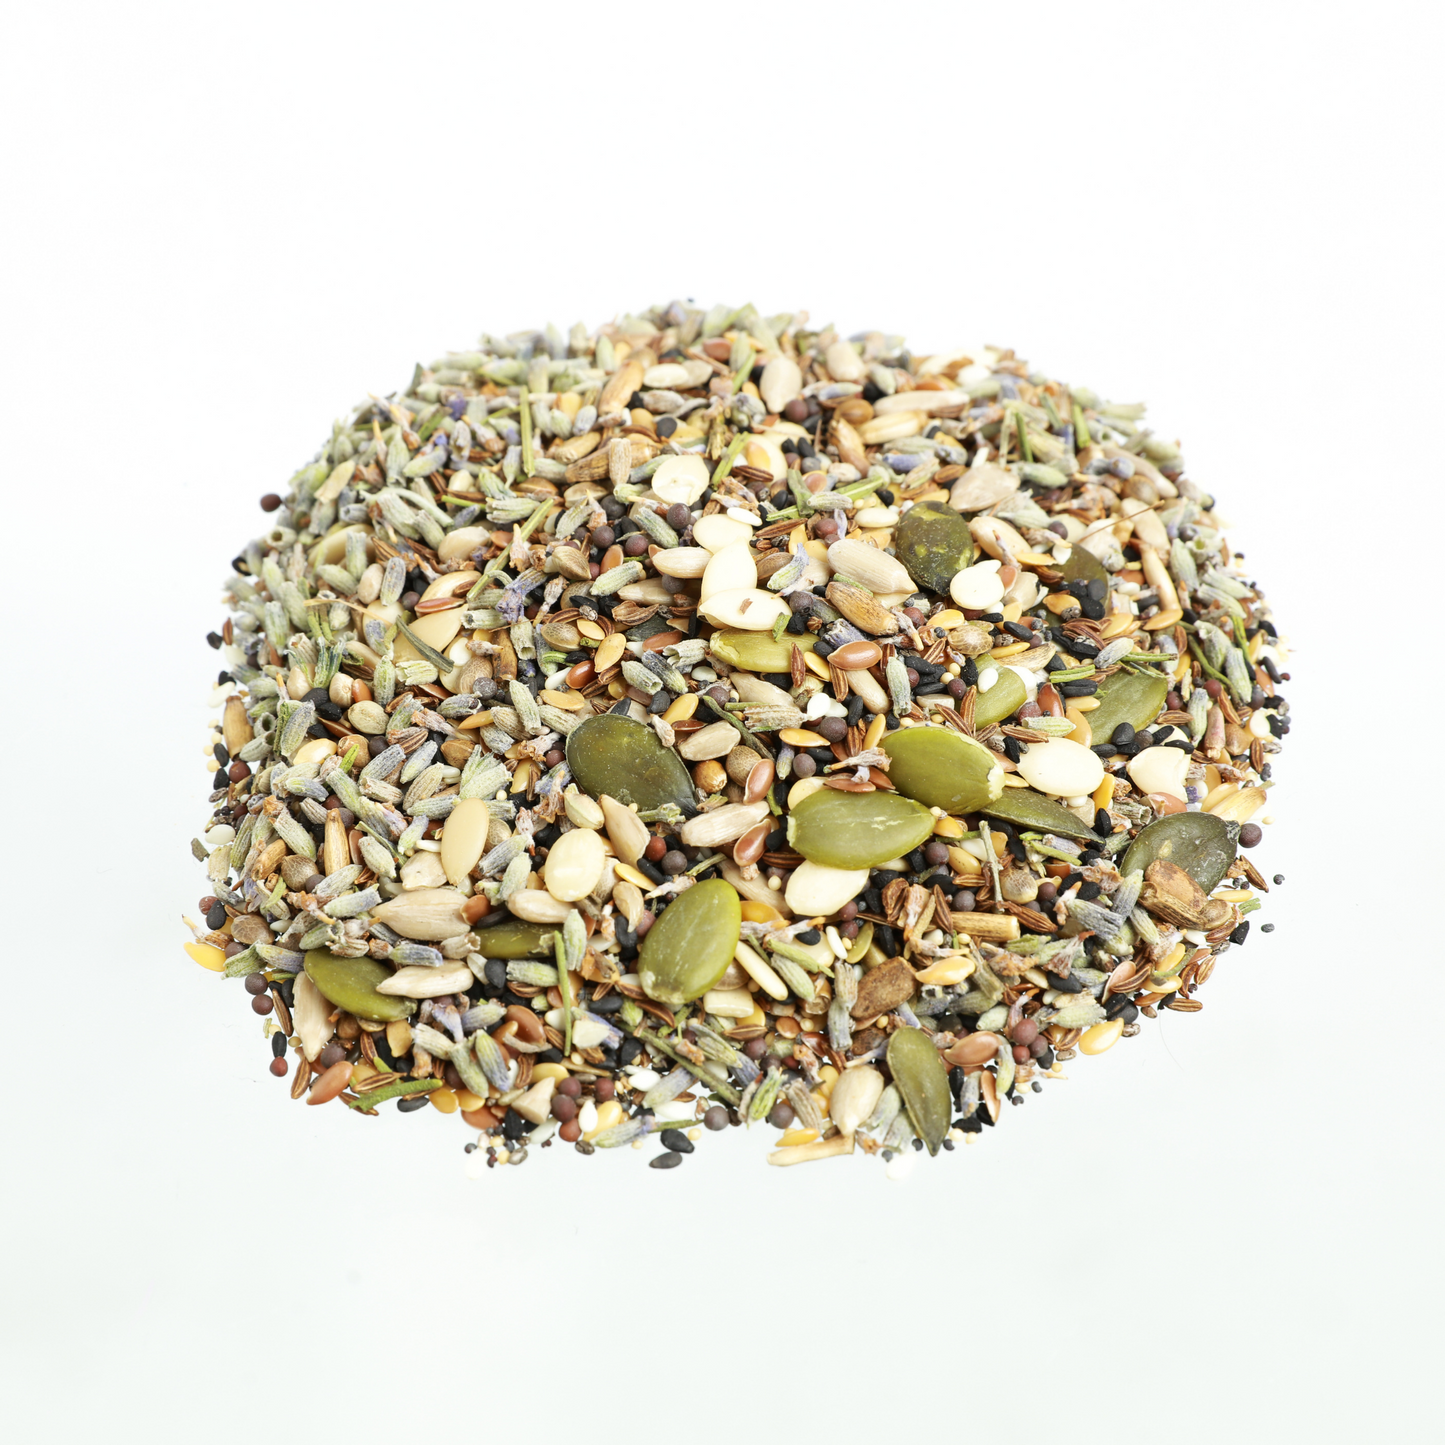 Calming Seed Mix For Parrots - 500g